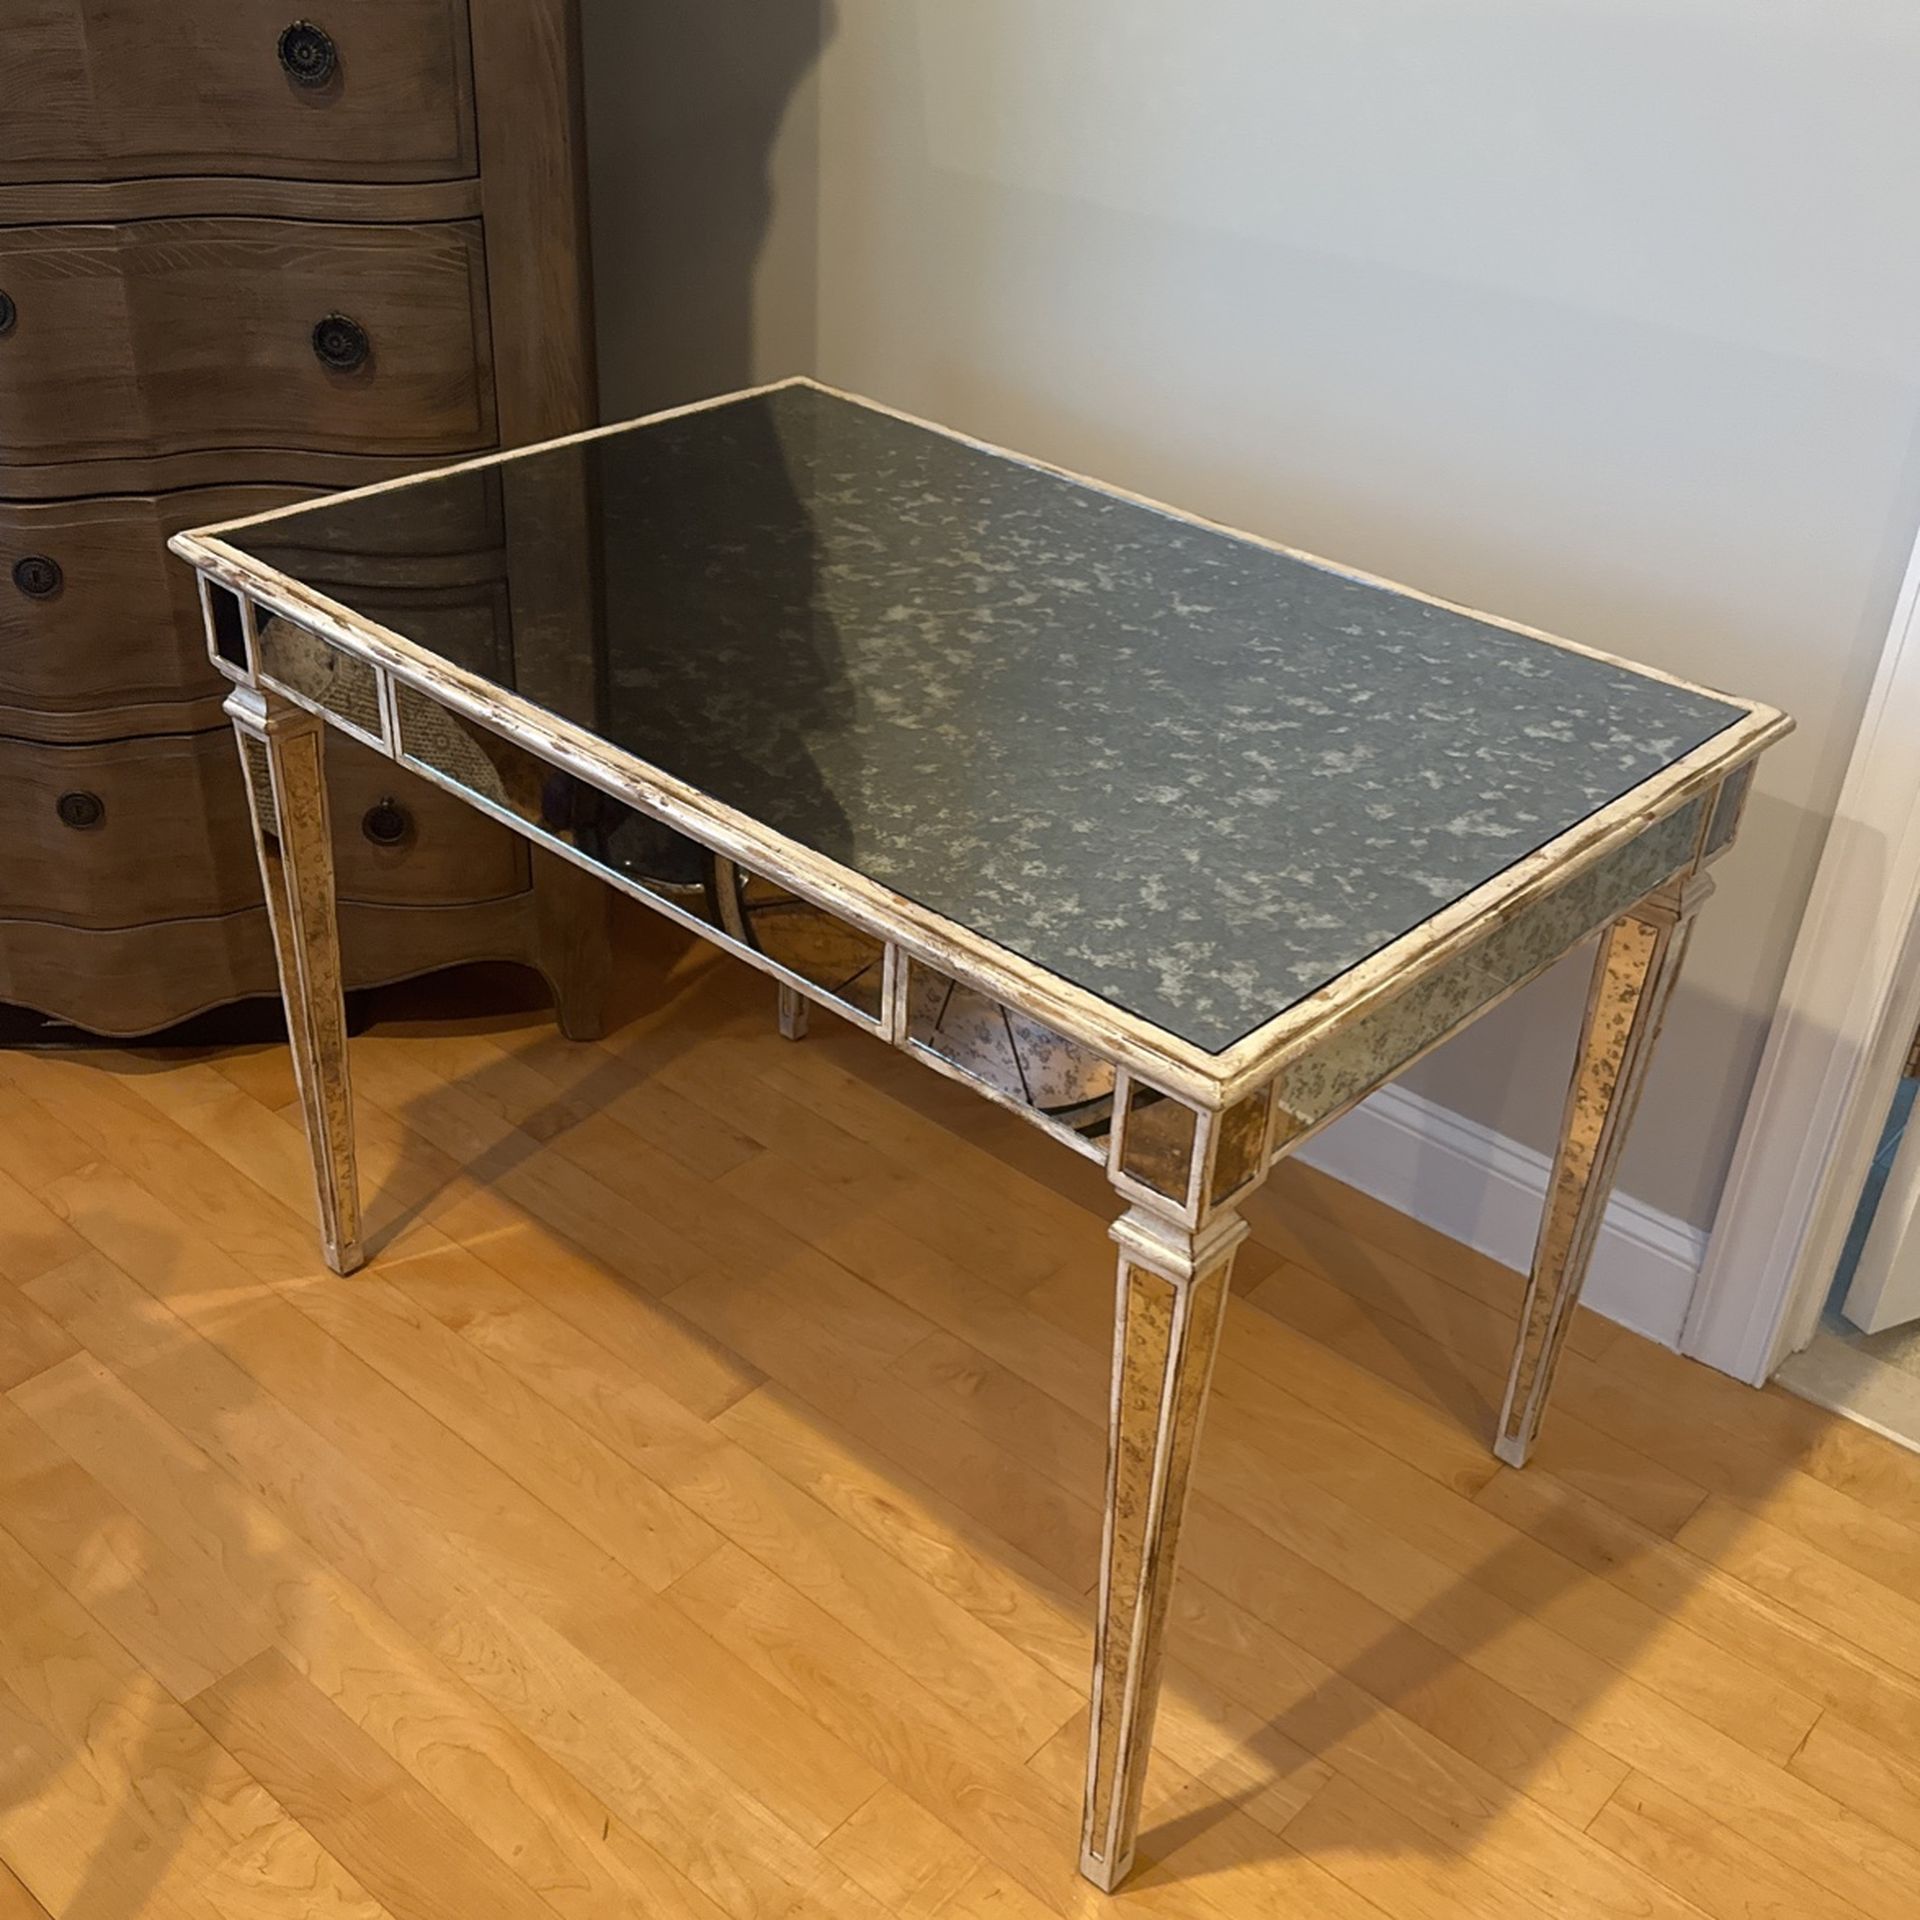 Small Glass Desk Or make up vanity 